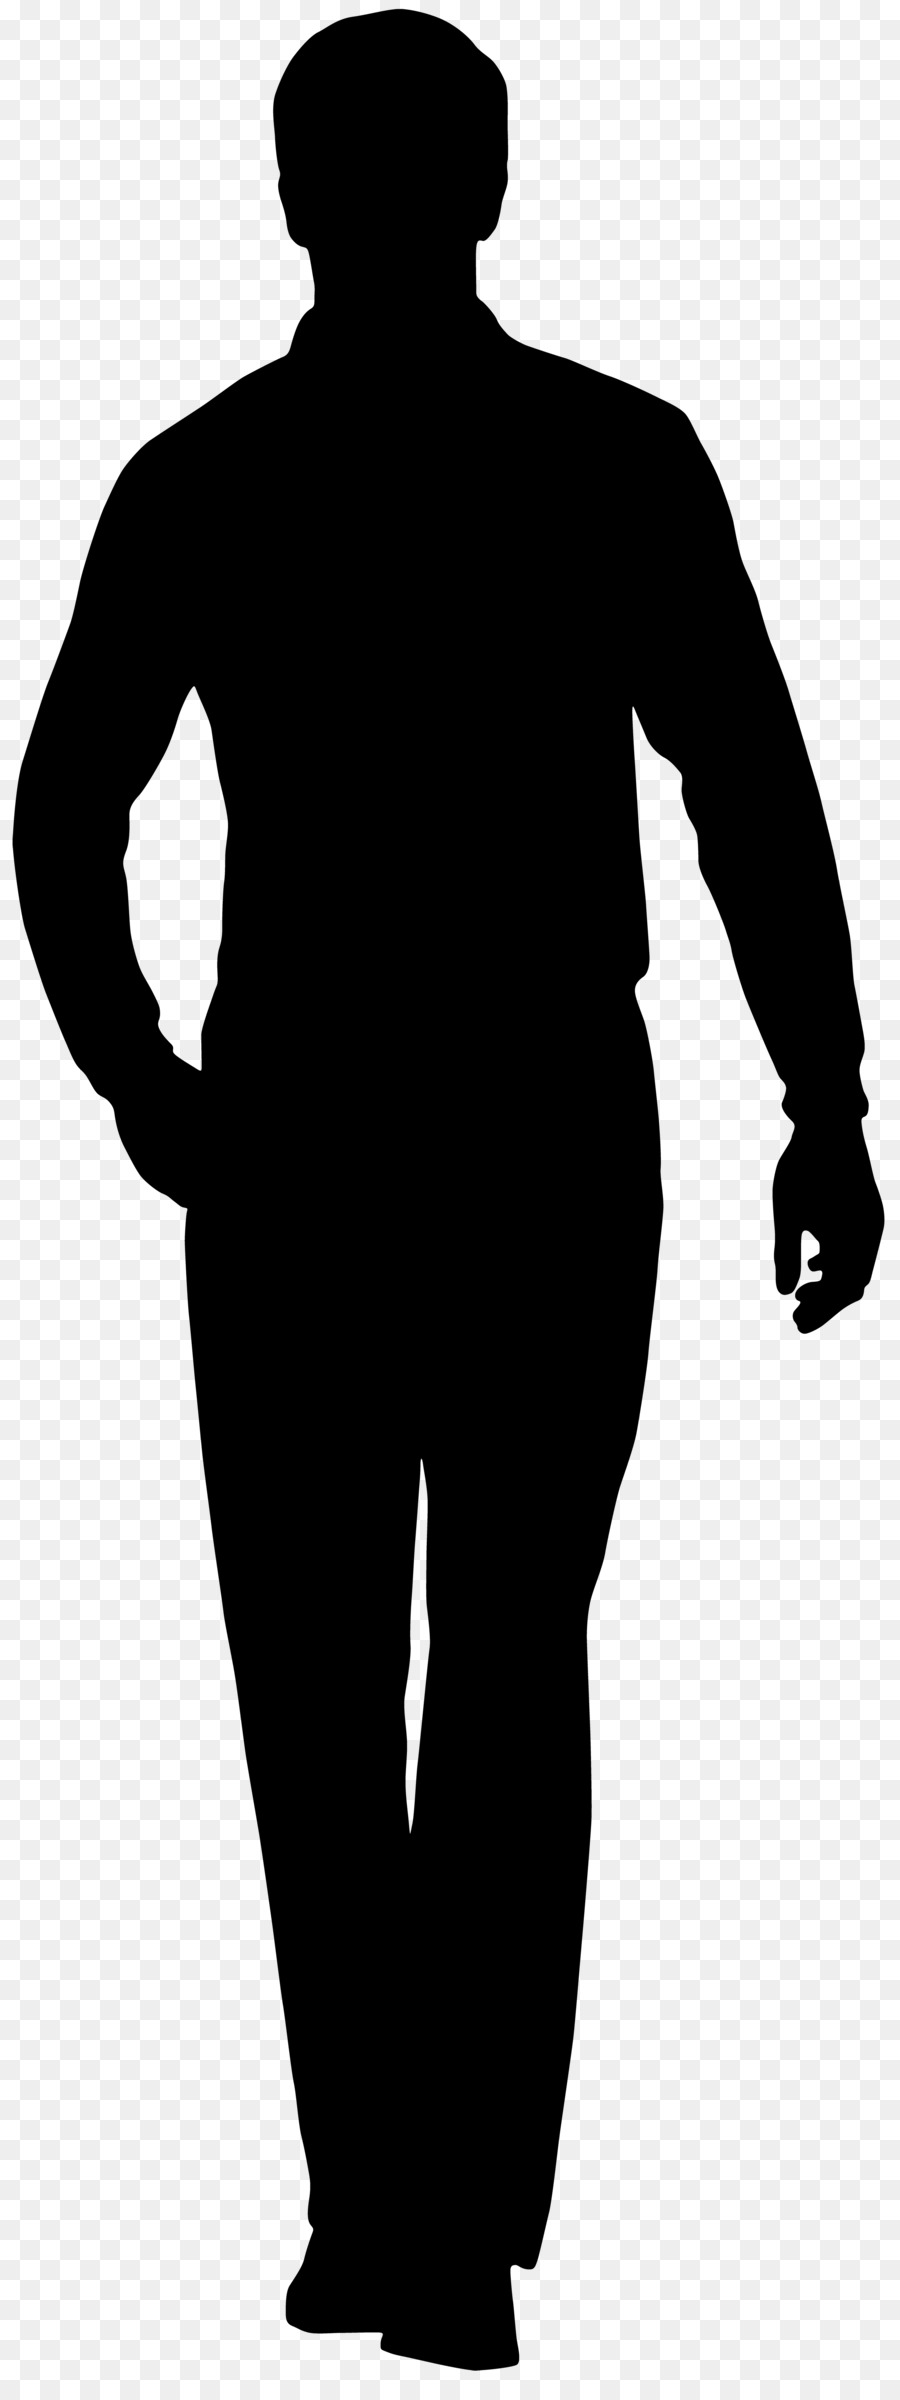 Clip art Silhouette Image Walking Vector graphics - Silhouette png download - 640*1280 - Free Transparent Silhouette png Download.